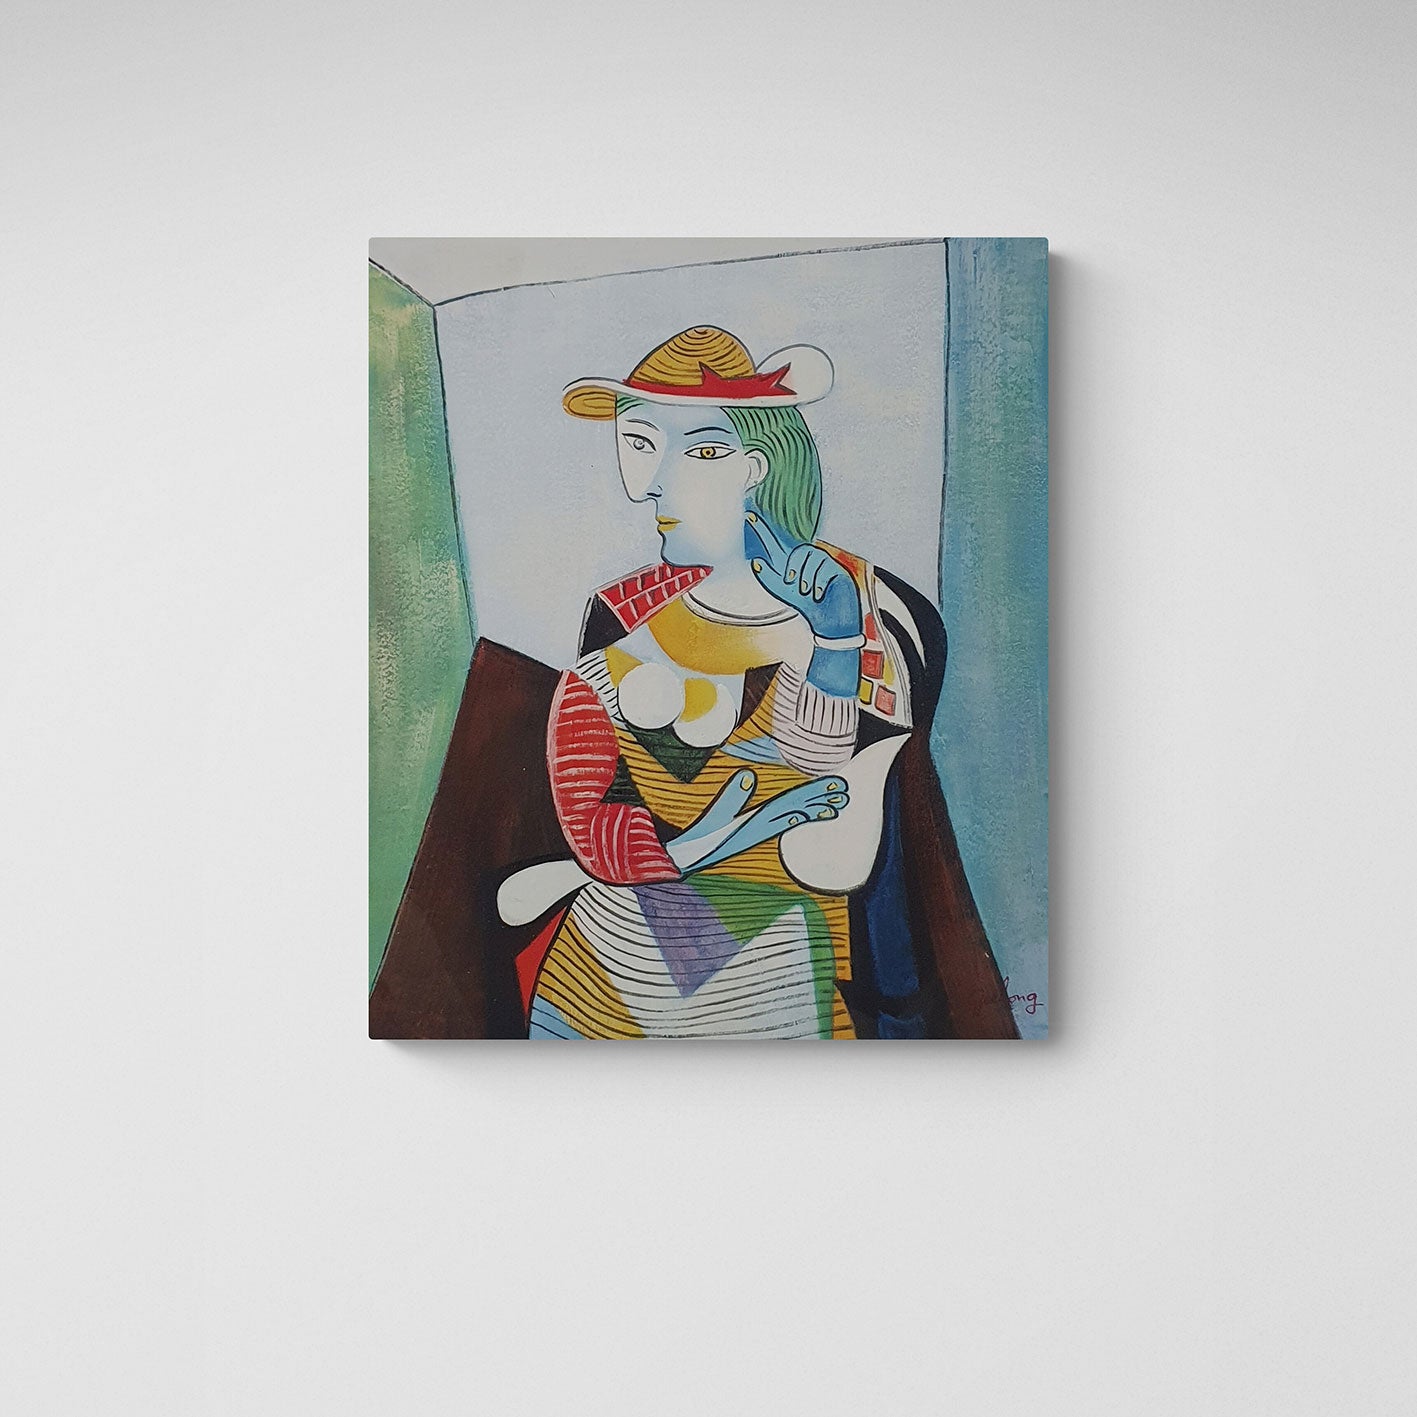 Picasso painting Woman Seated 50x60 cm